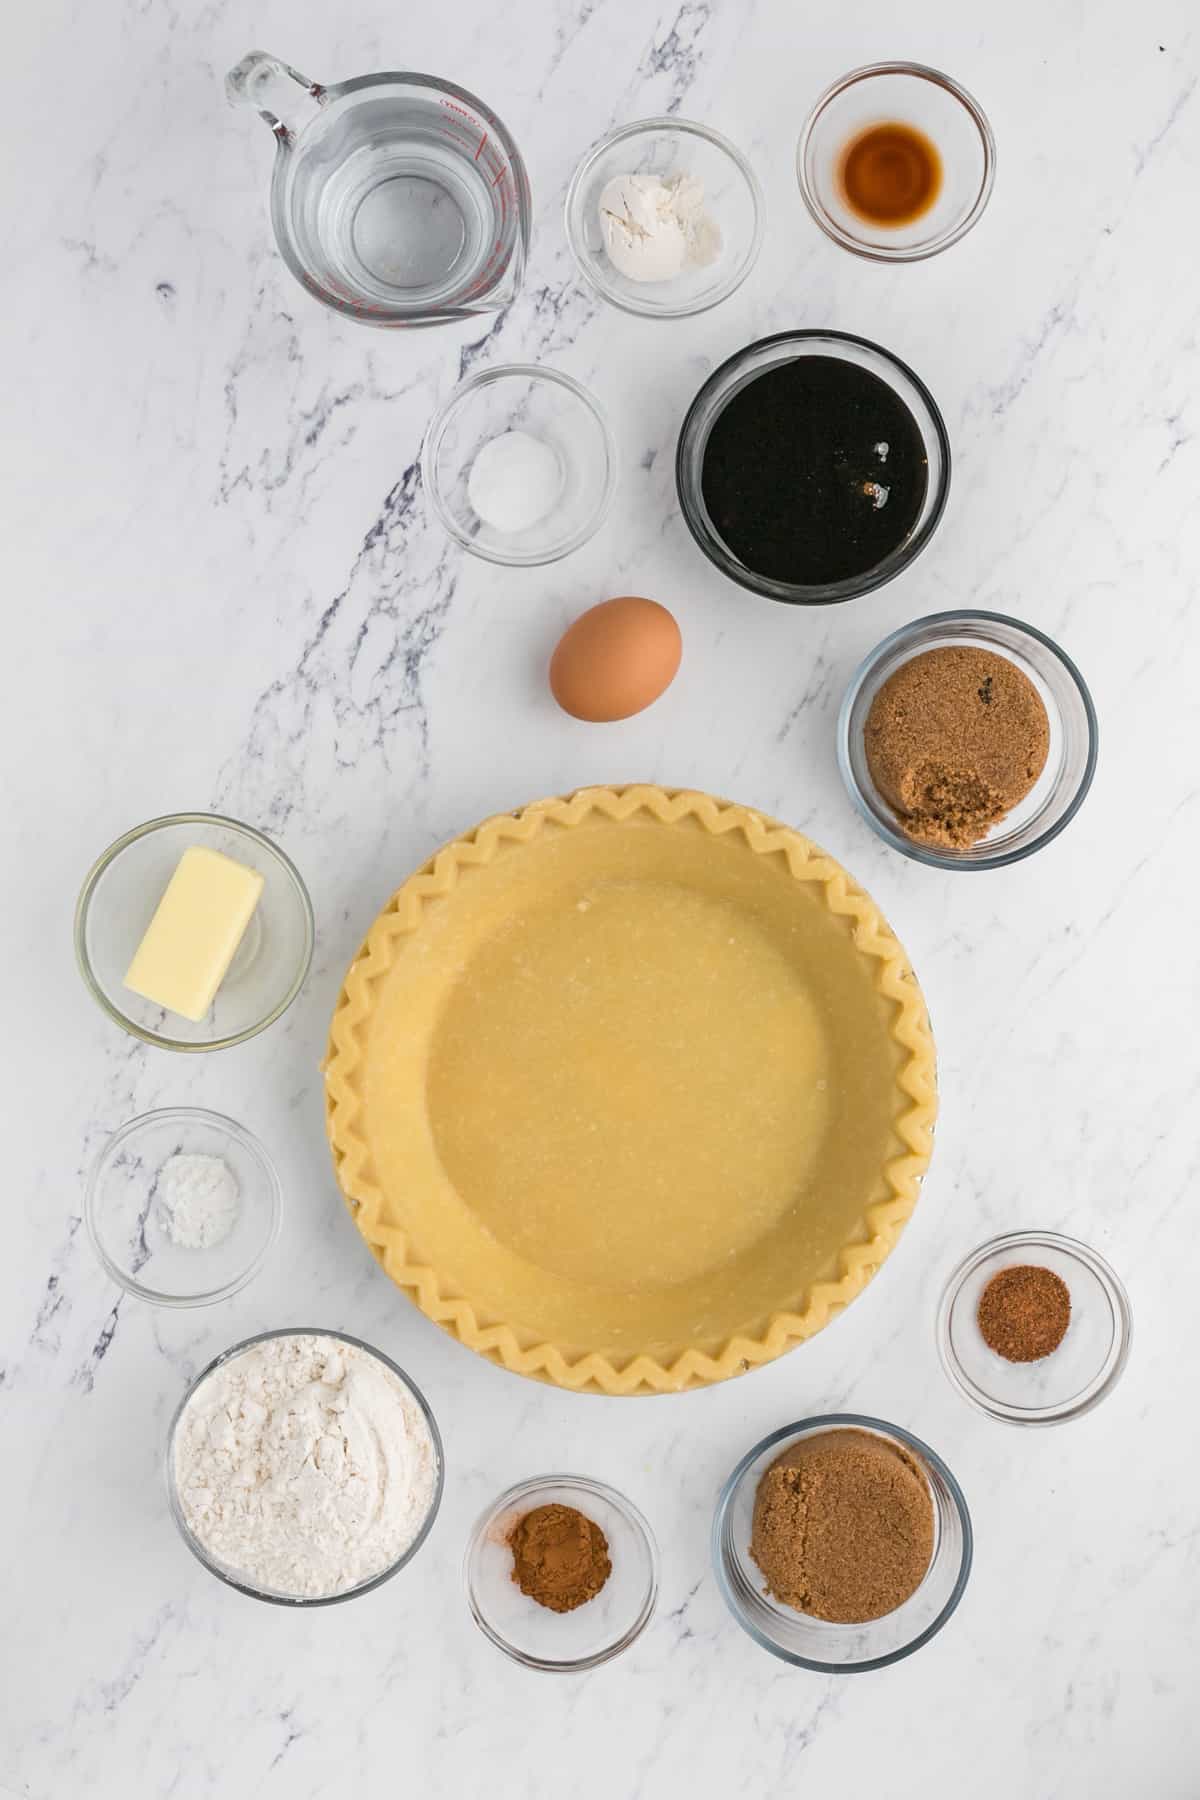 Ingredients to make a shoofly pie in small bowls on a white surface.